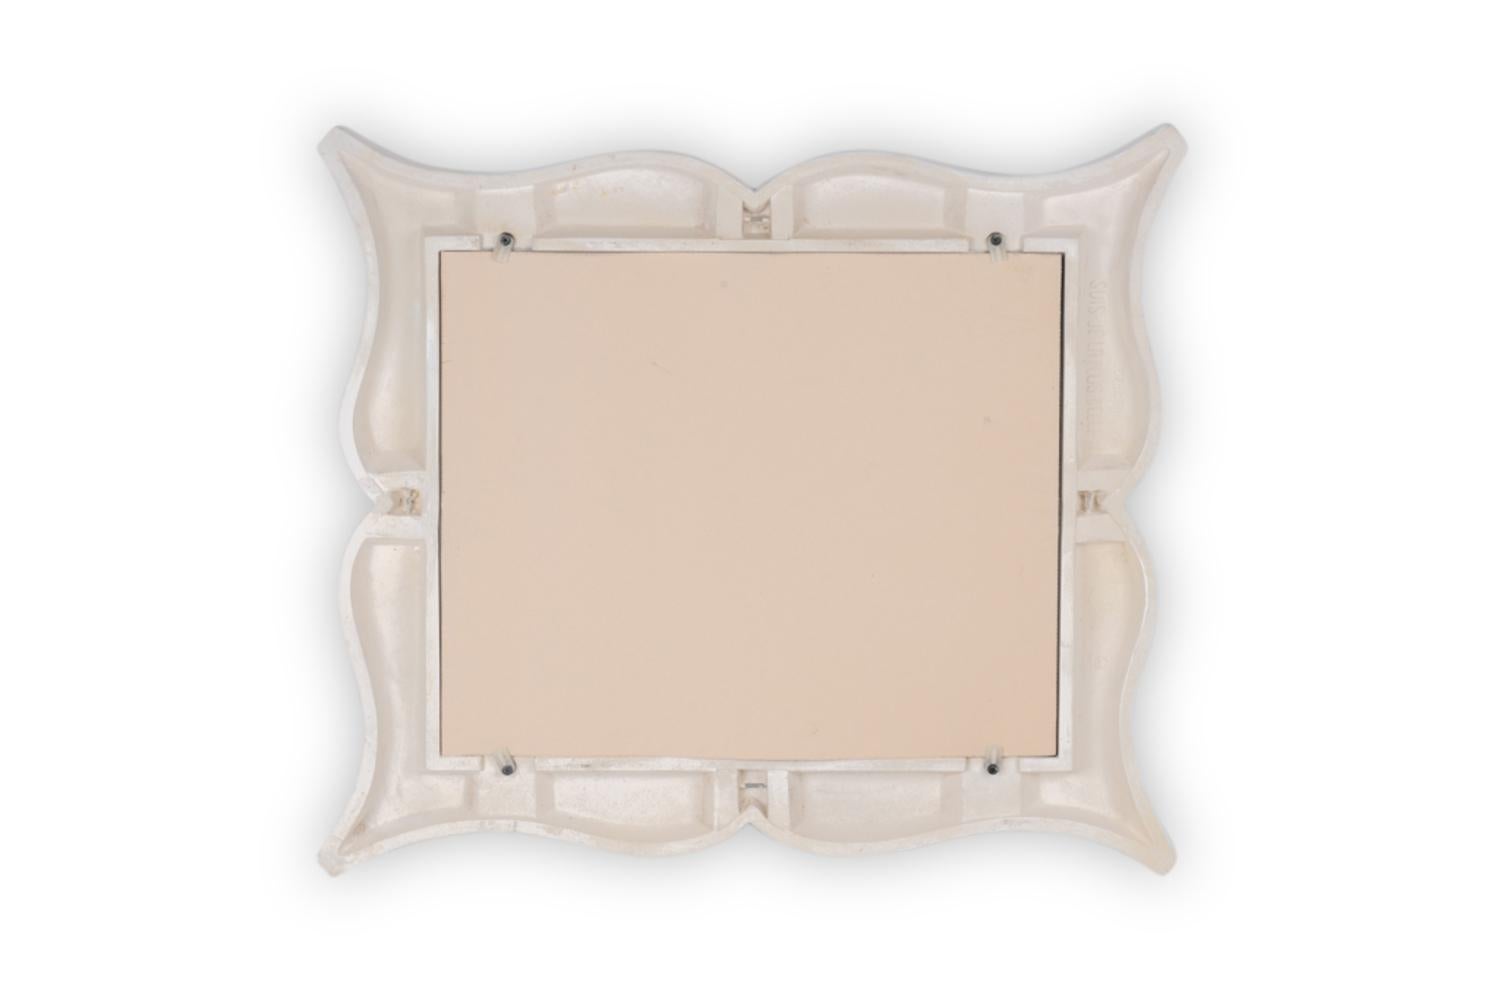 Matthew, signed.

Stucco mirror in “mustache” shape, or wavy, in off-white or pink tones.

French work realized in the 1990s.

Reference: LS5960309J